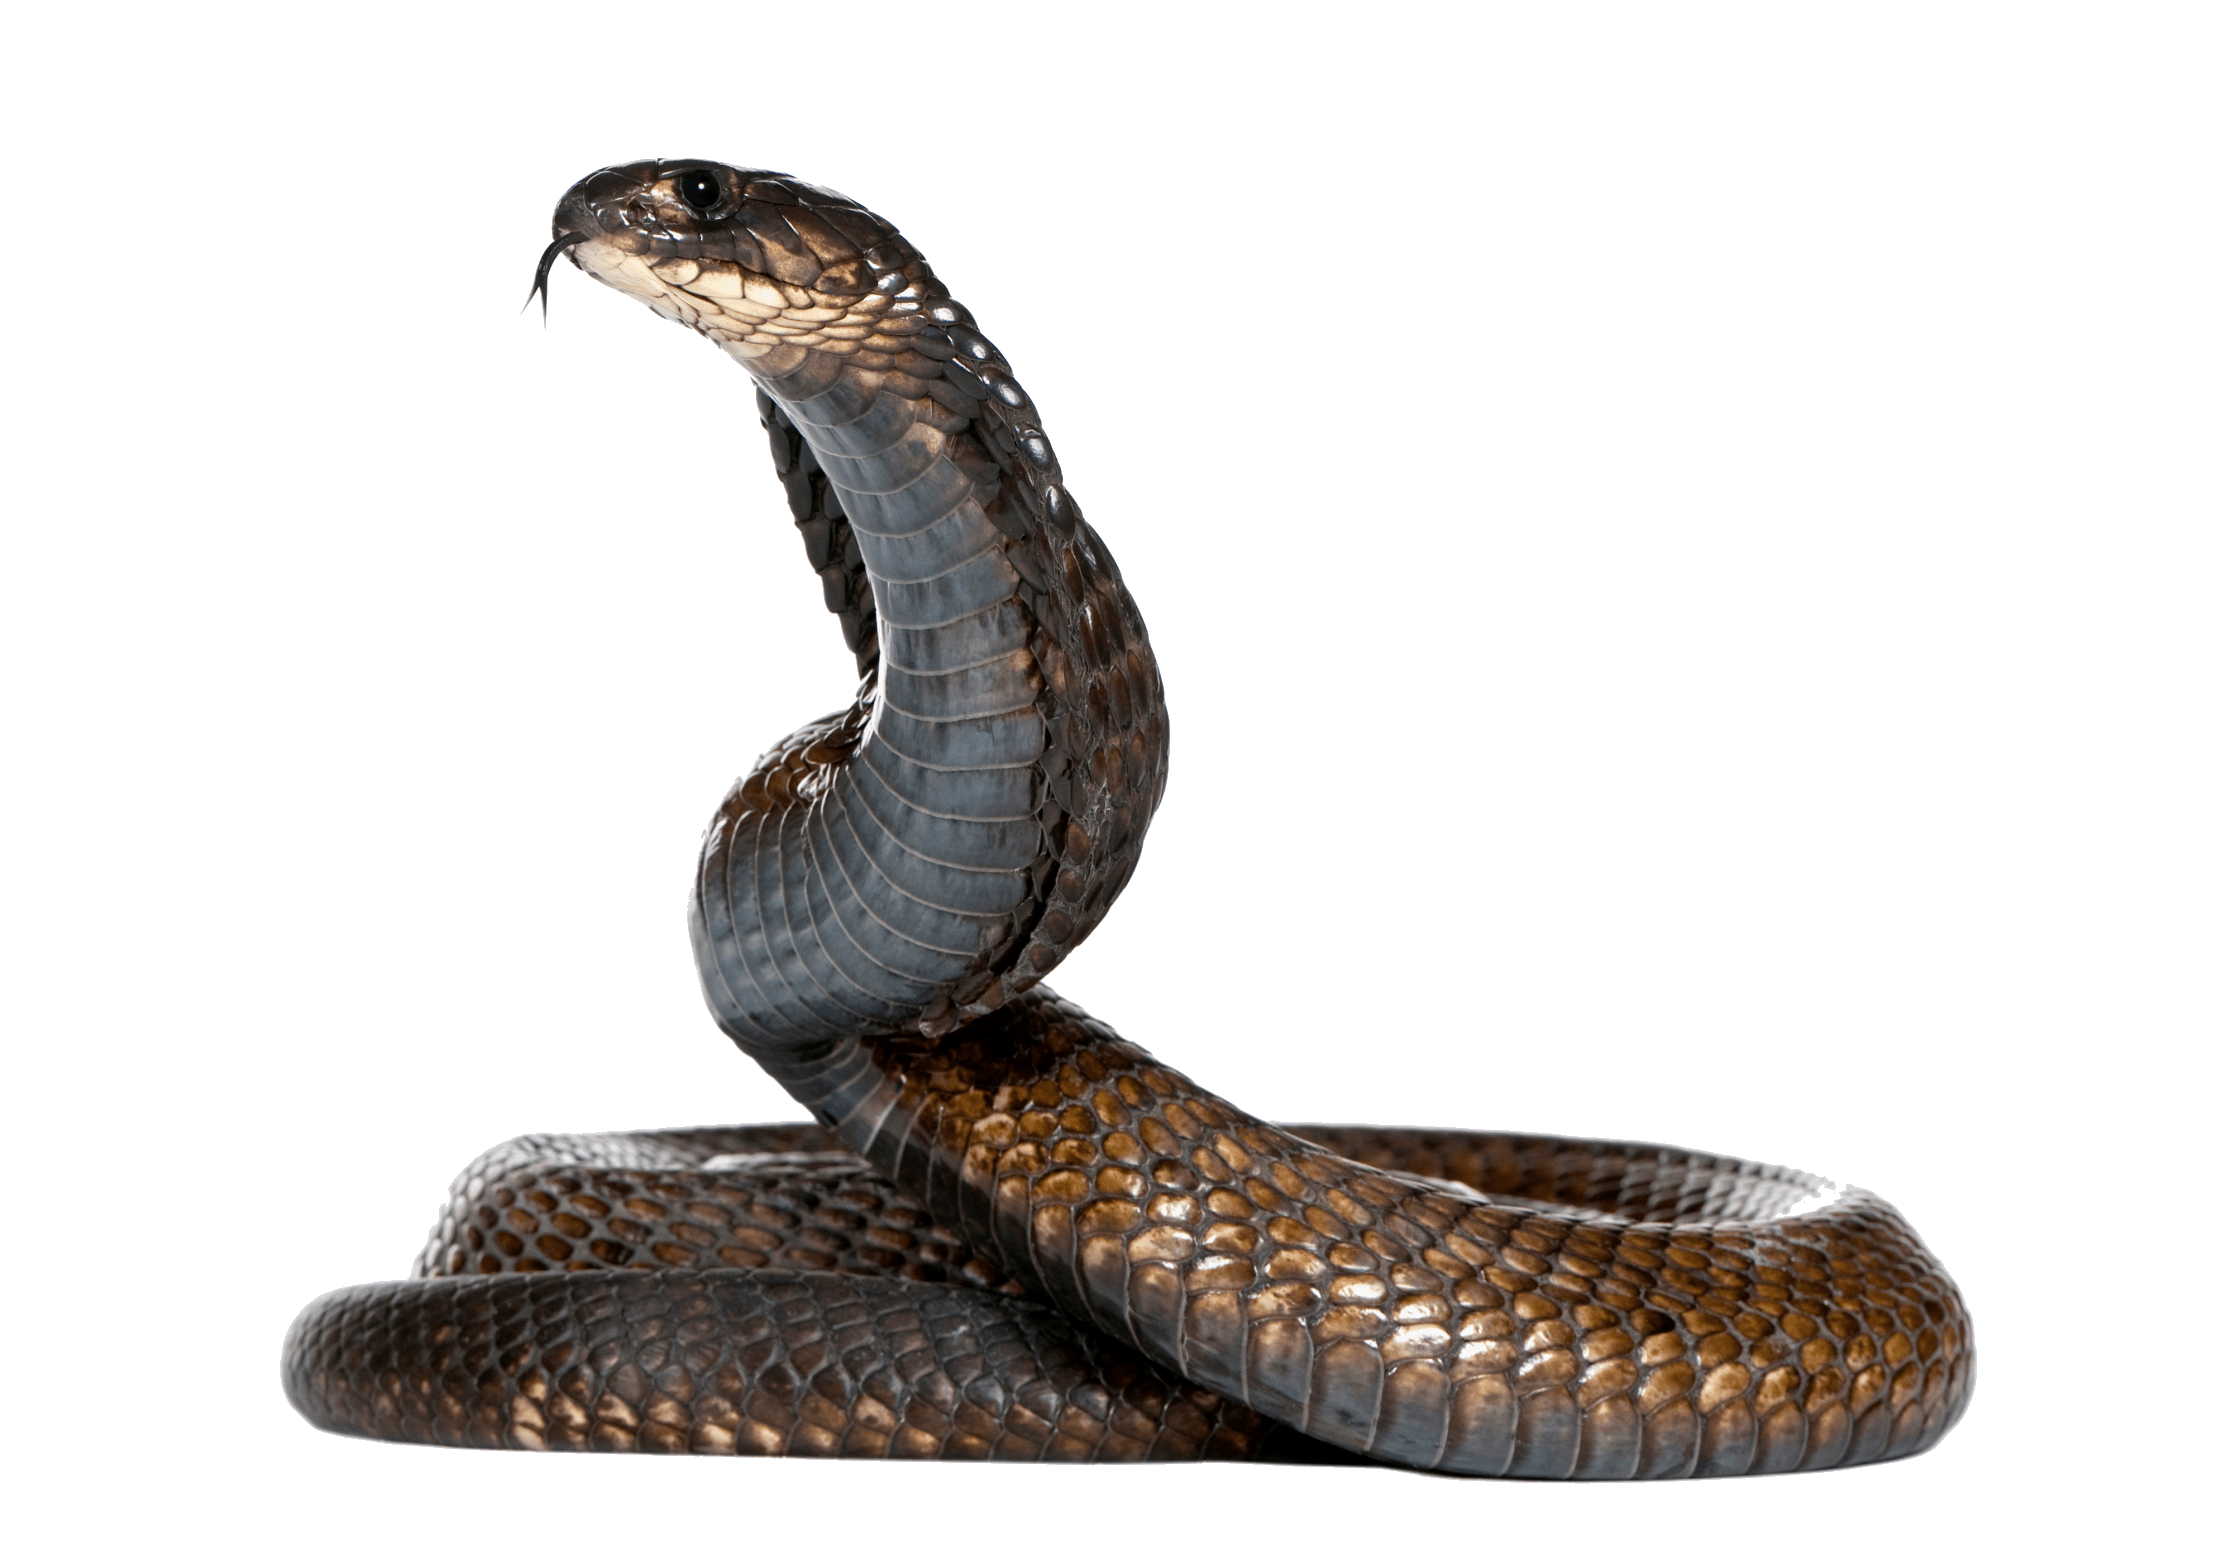 Cobra Snake Png Image Png Image - Cobra Snake, Transparent background PNG HD thumbnail